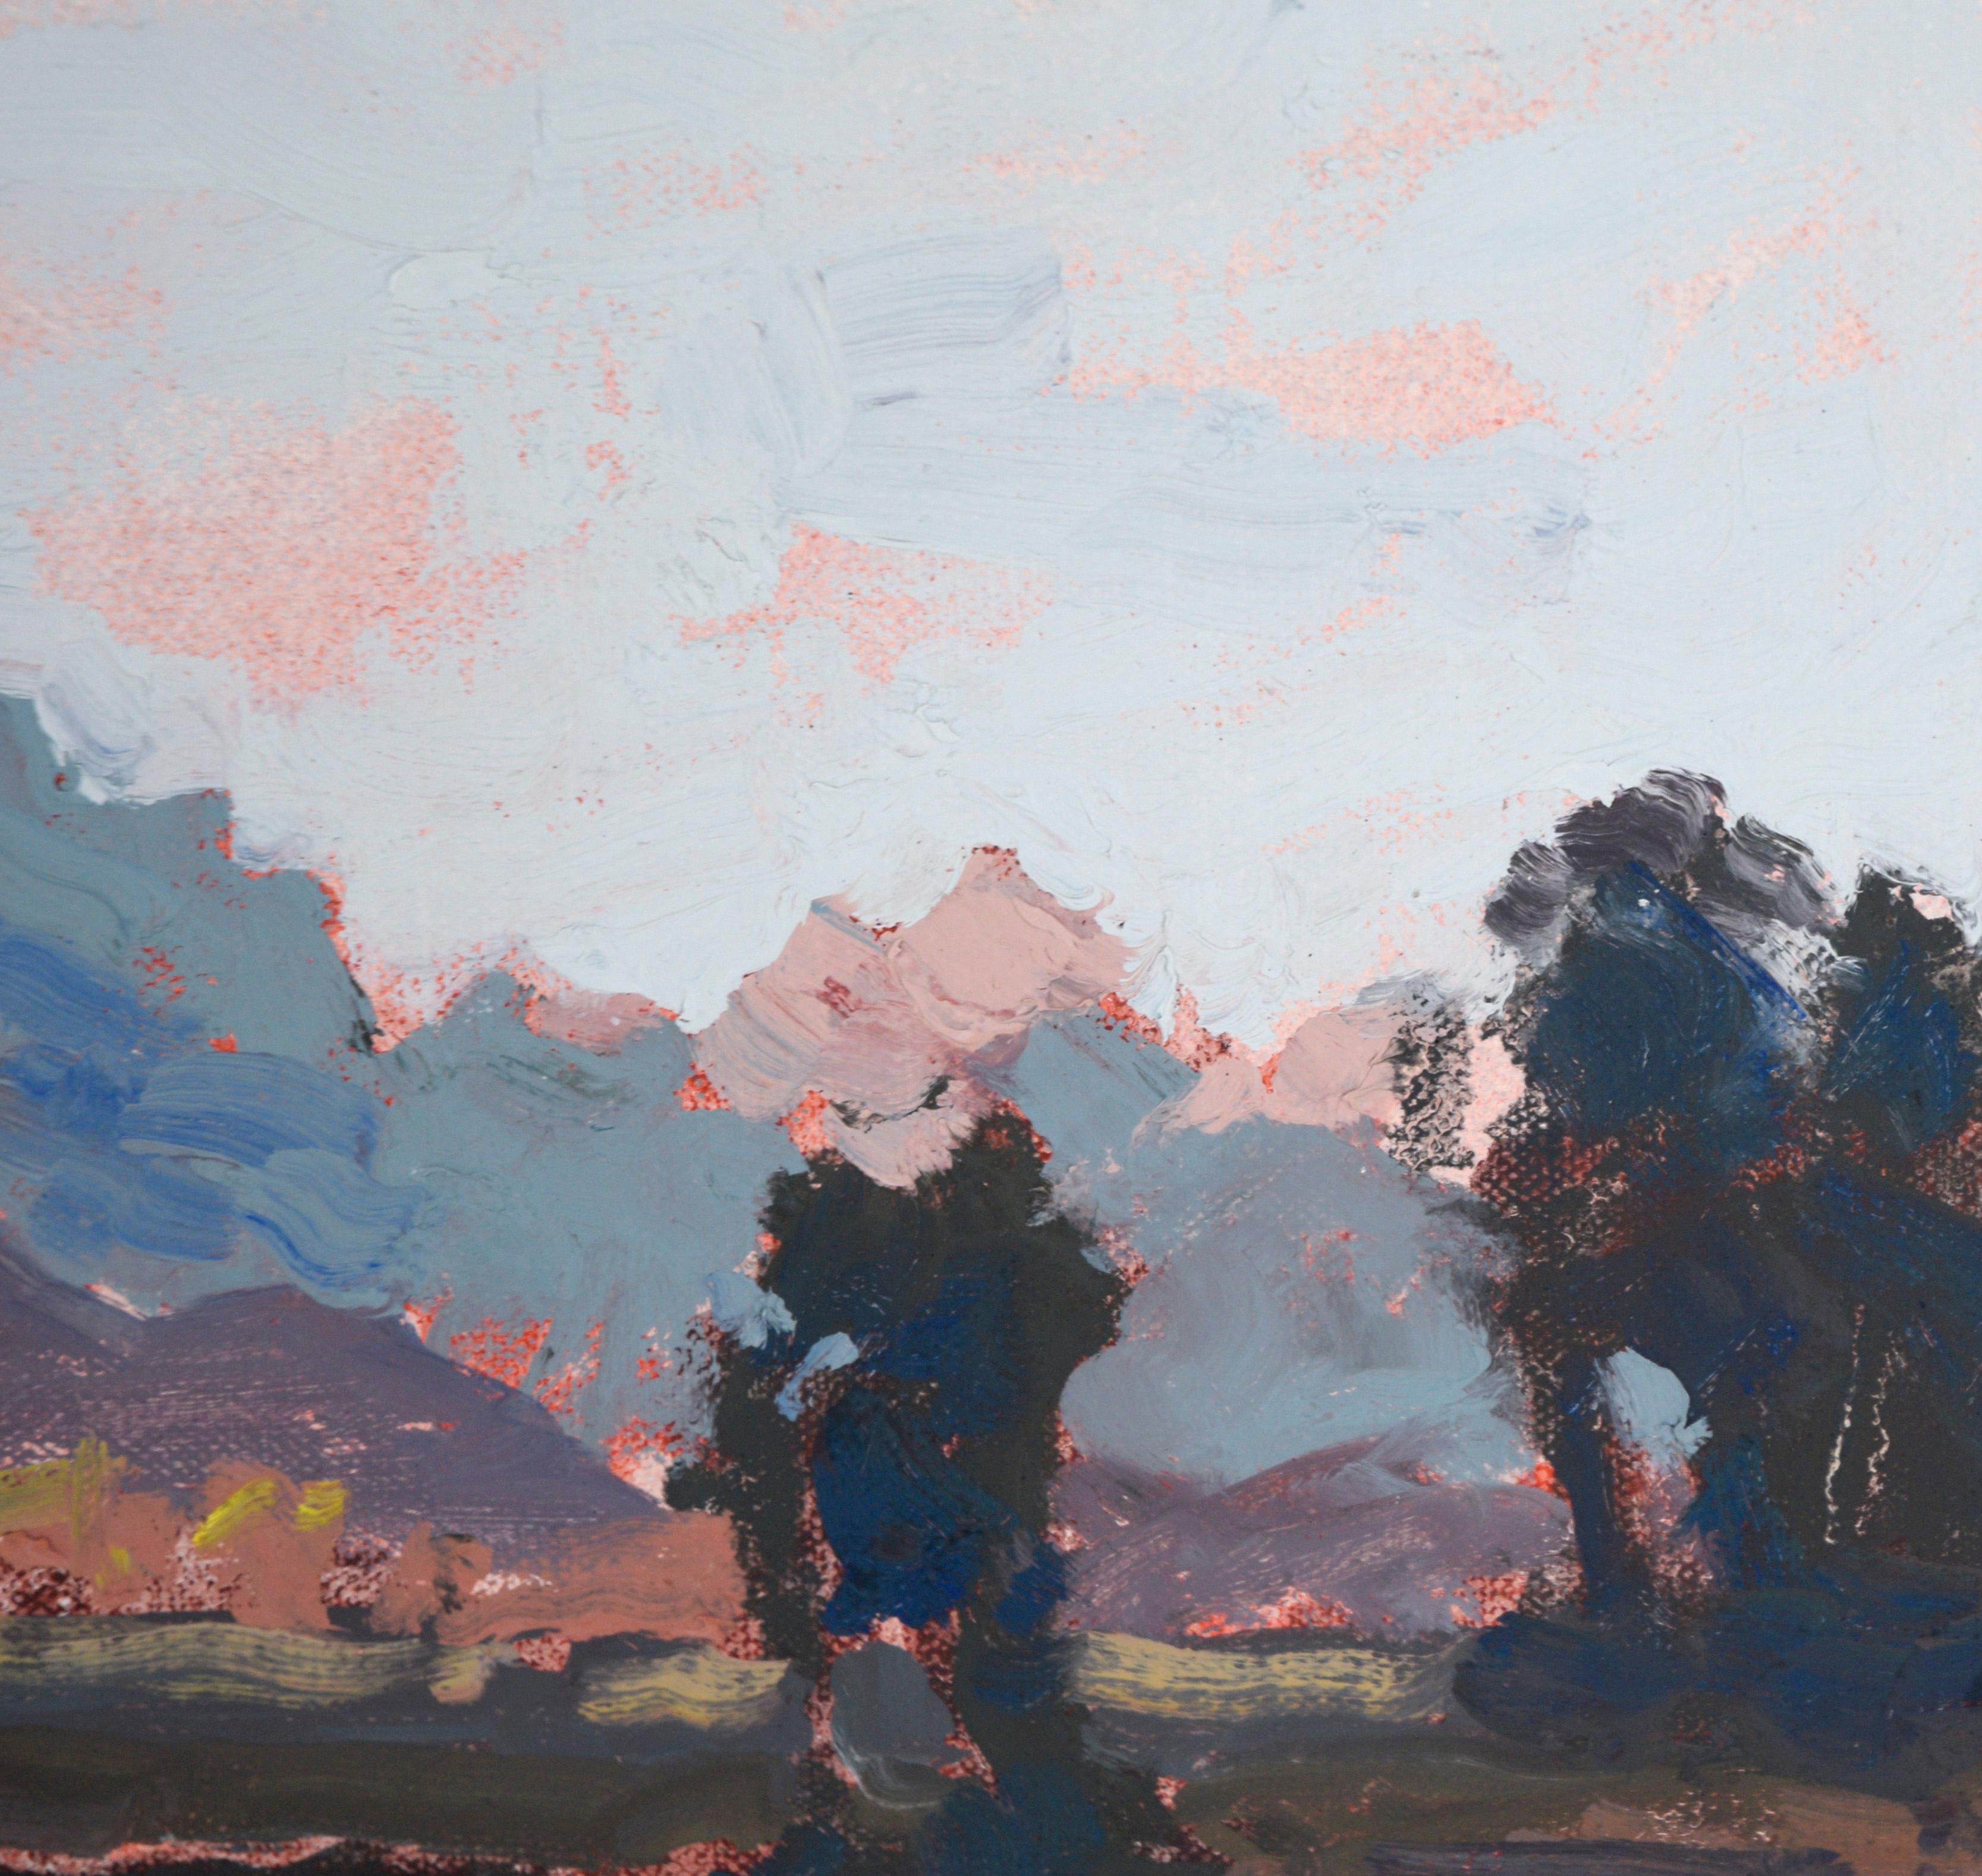 Sunset at Grand Teton National Park - Plein Aire Landscape in Oil on Board

Vibrant plein aire landscape by Thomas Bradshaw (American, b. 1972). This landscape was complete on site, most likely at Grand Teton National Park. The viewer is at the edge